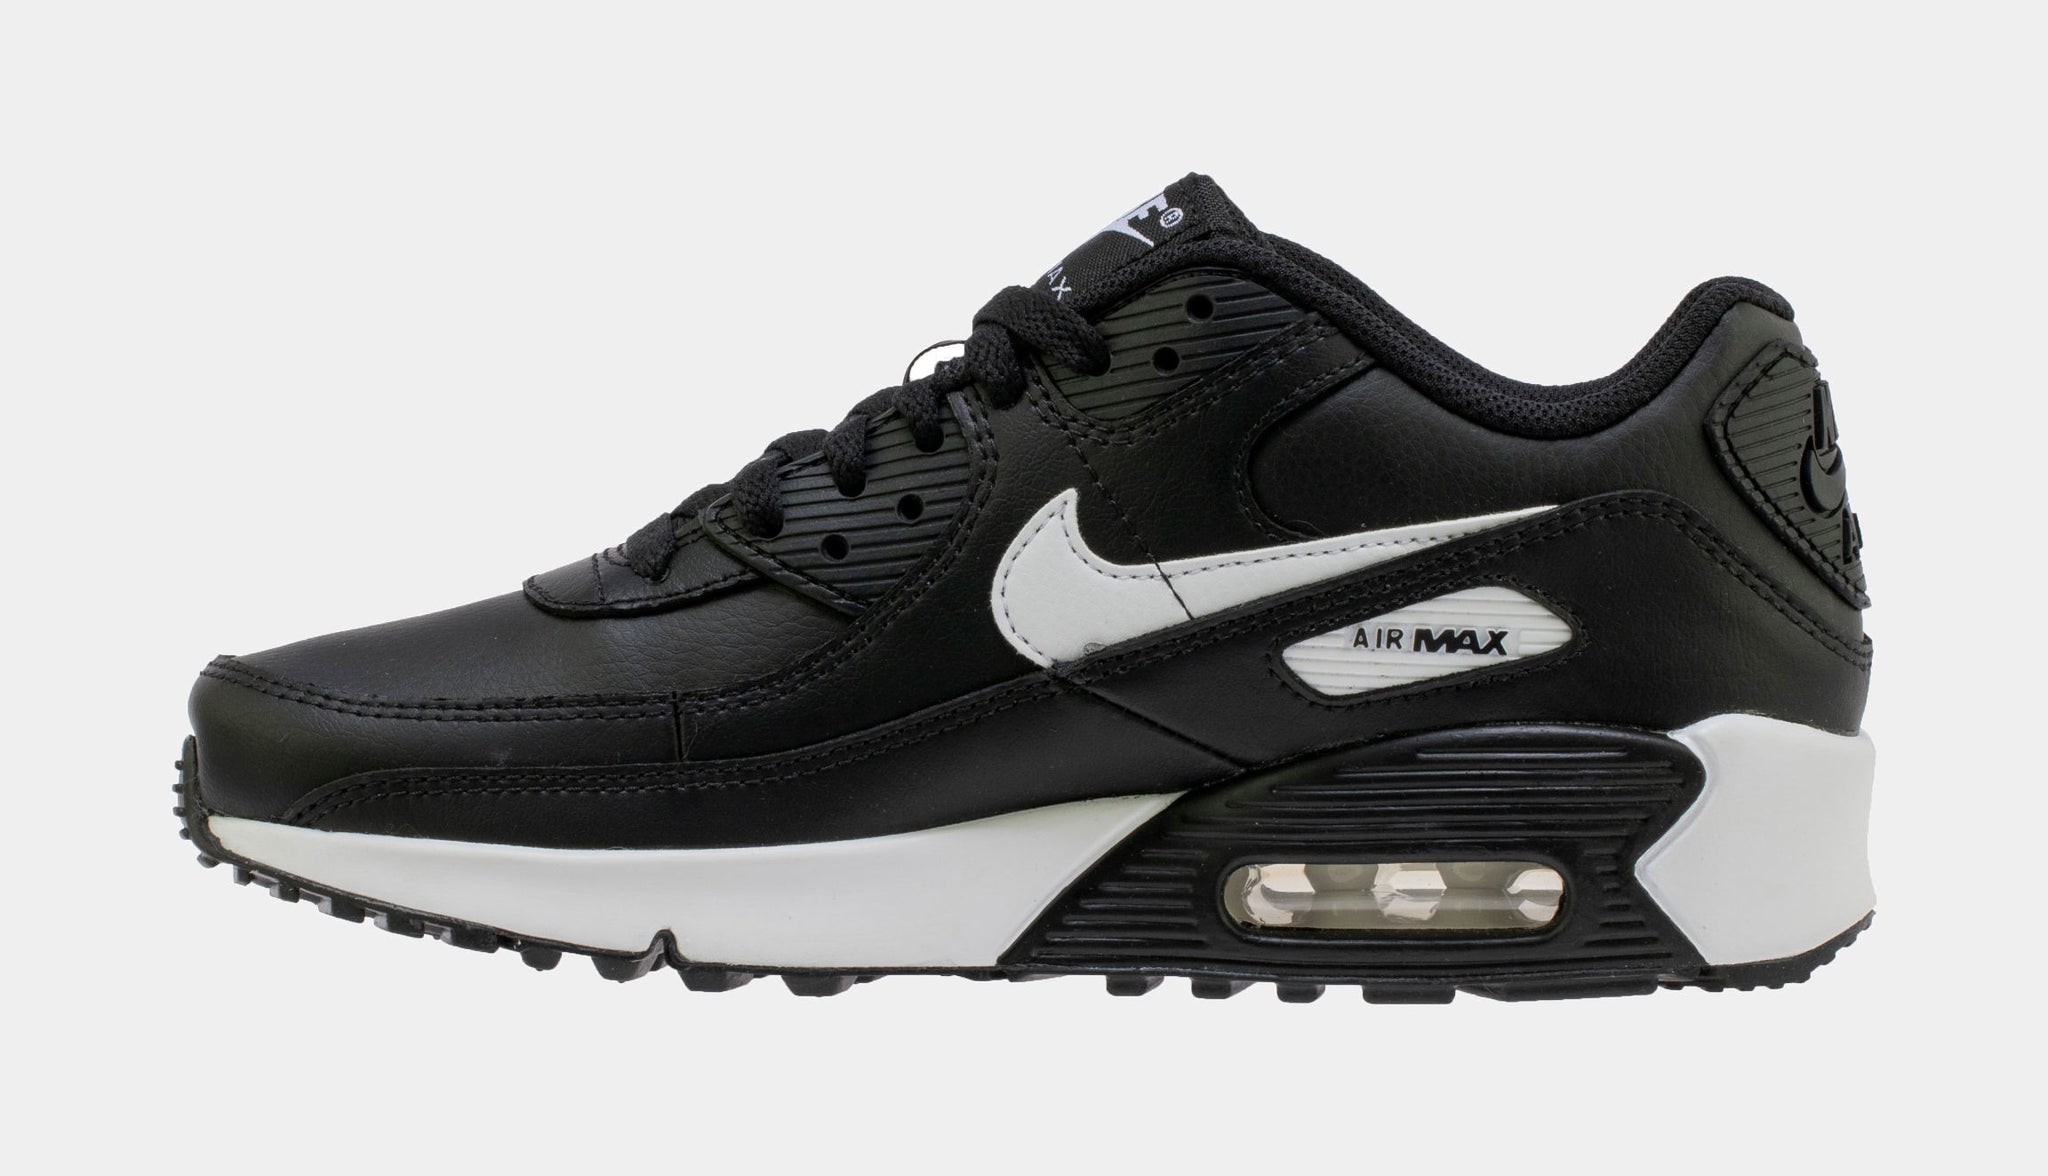 Nike Air Max 90 365 Leather Grade School Running Shoes Black ...